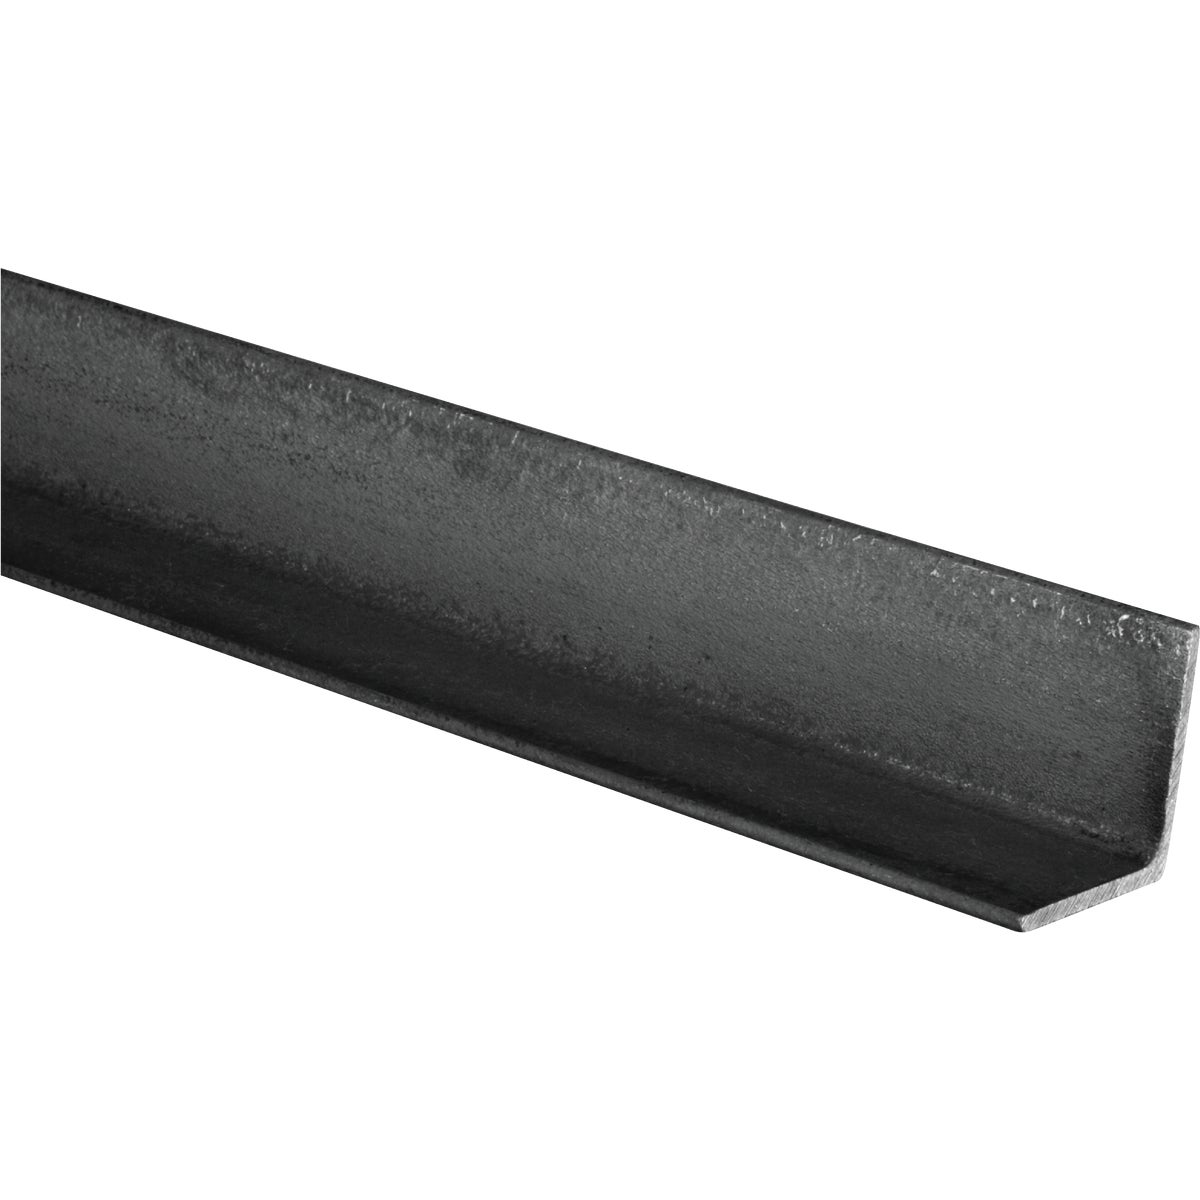 Hillman Steelworks 1-1/2 In. x 4 Ft., 1/8 In. Weldable Solid Angle